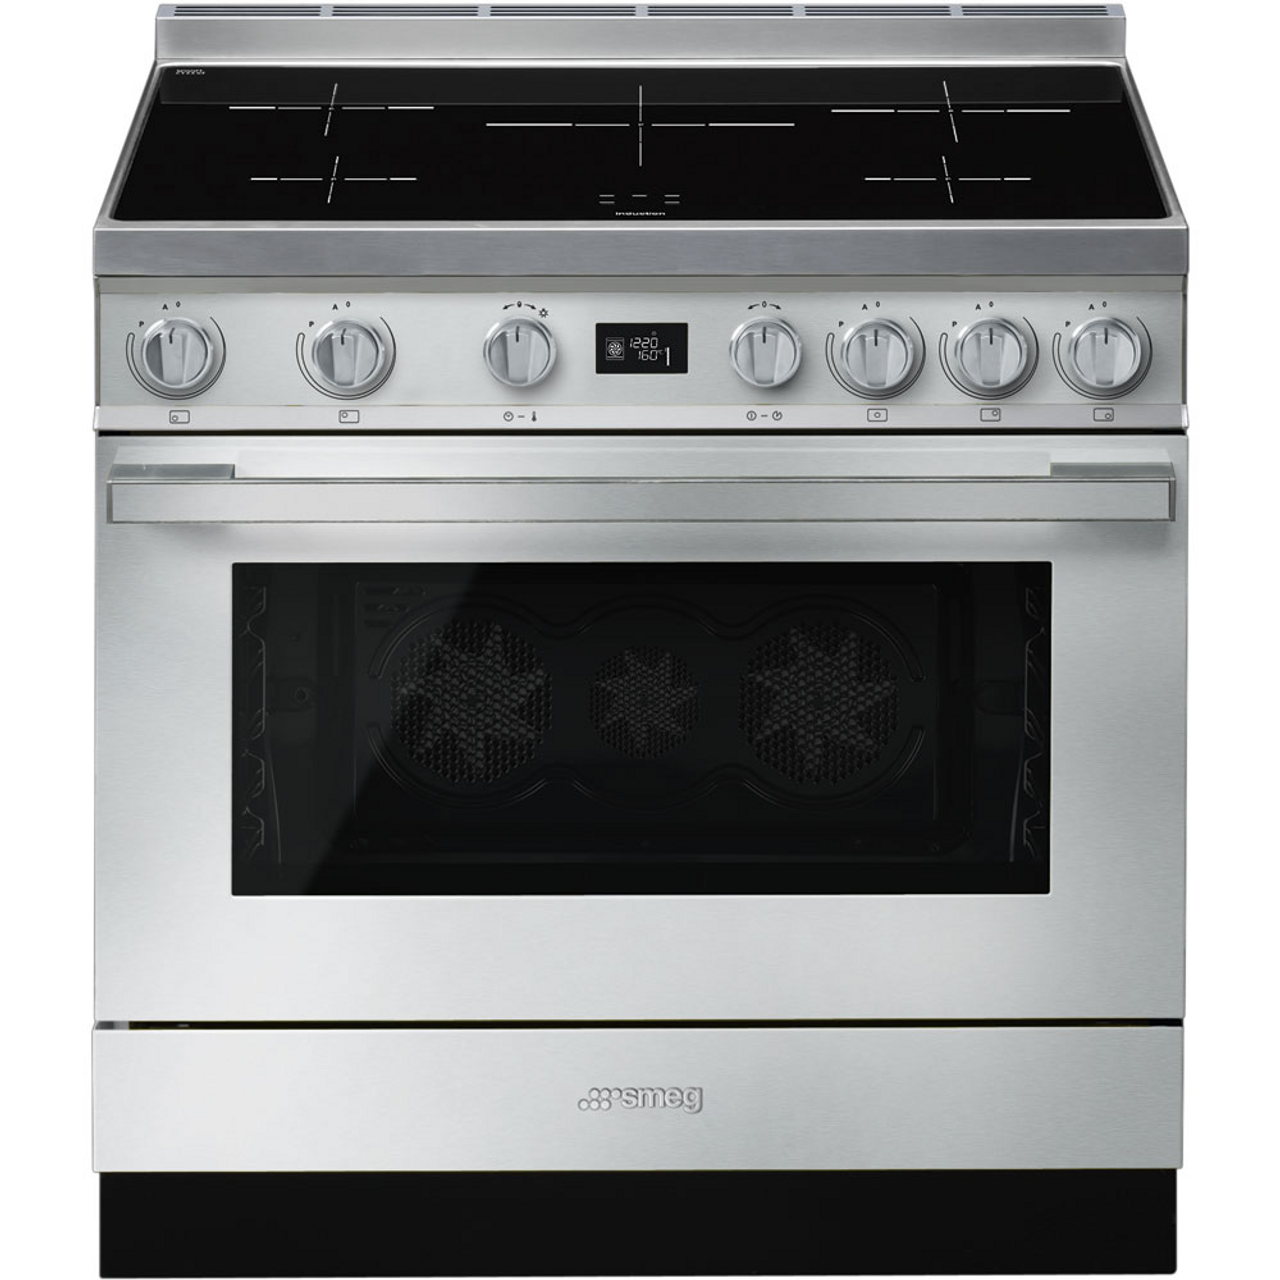 CPF9IPX - 90cm Portofino Freestanding Cooker, 5 Zone Induction, Pyrolytic Cleaning - Stainless Steel